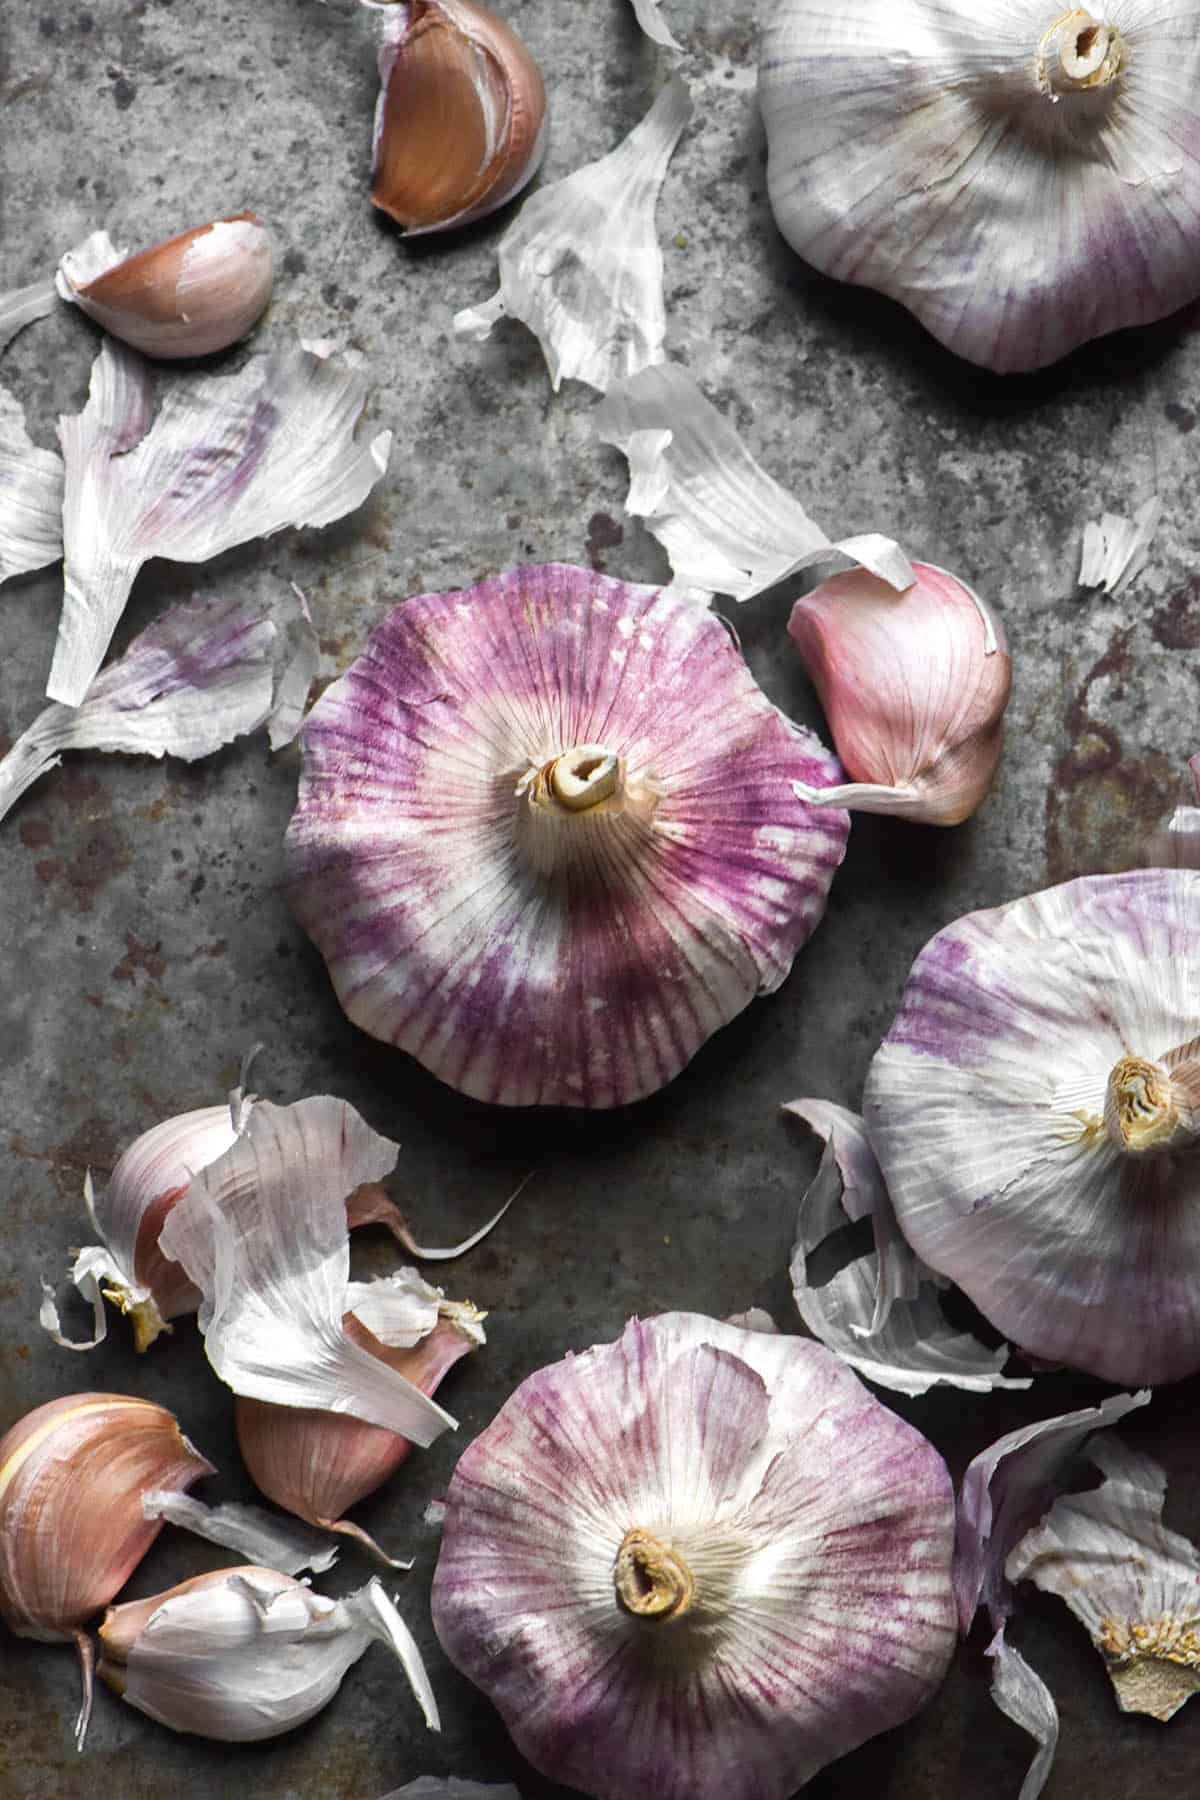 An aerial image of purple and white heads and cloves of garlic arranged casually on a dark steel backdrop 